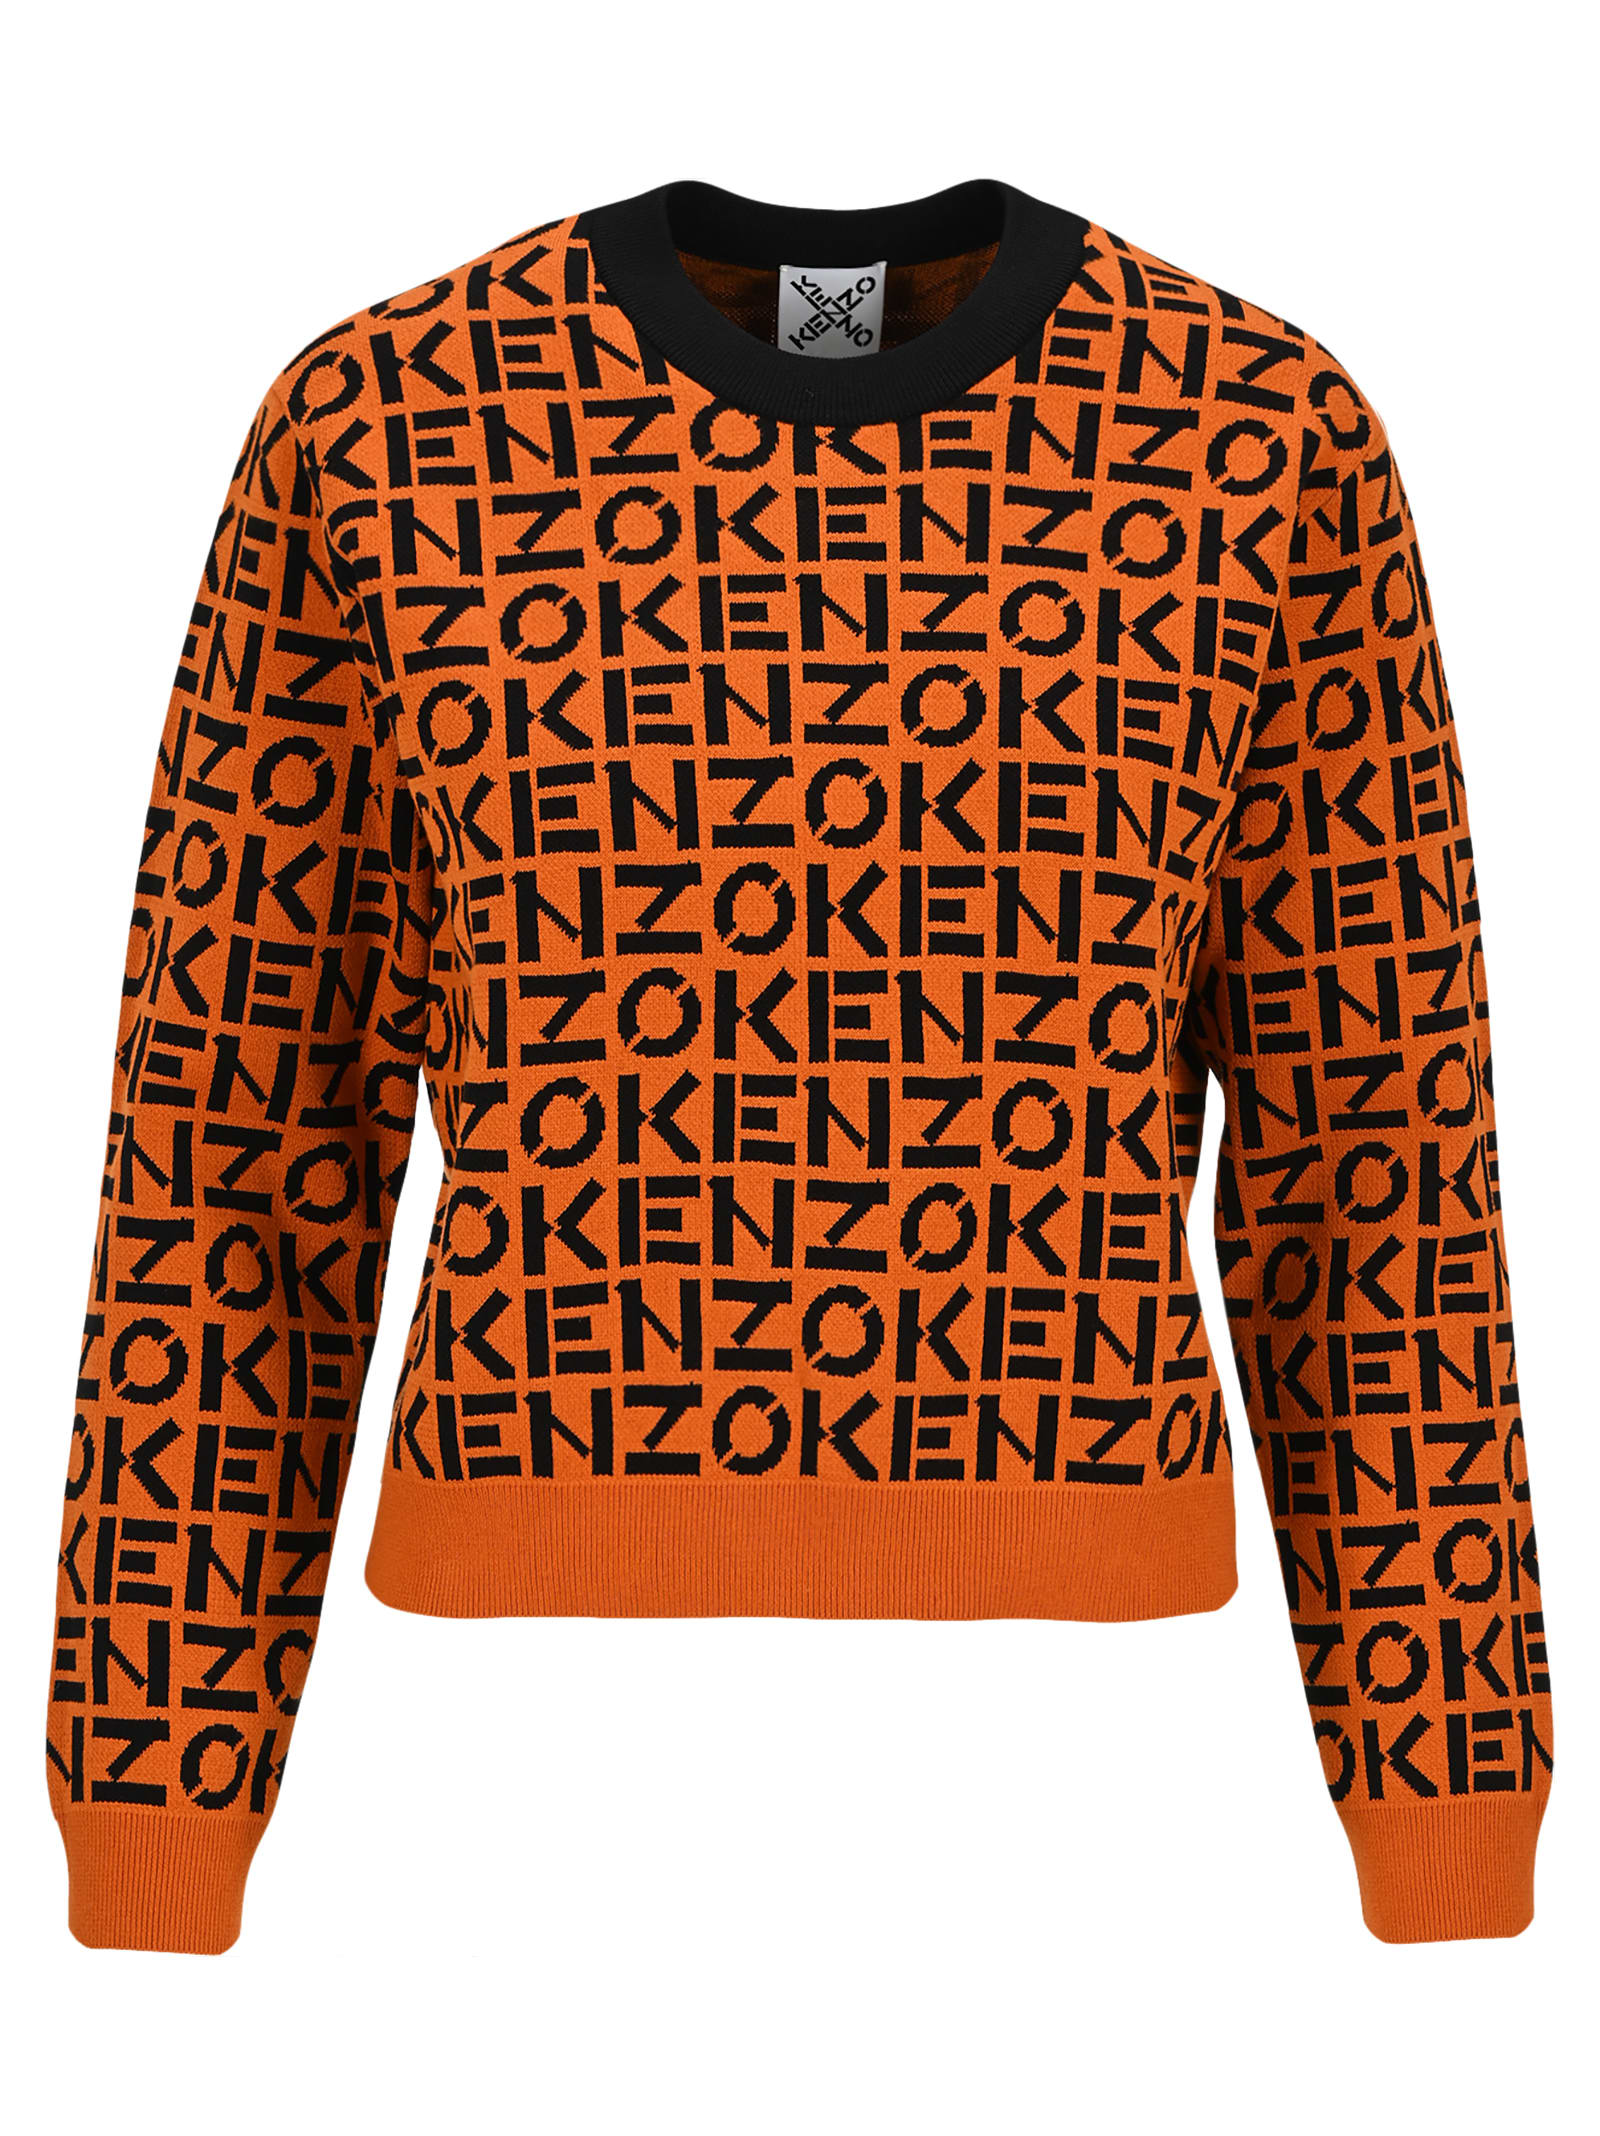 Buy Kenzo Intarsia Logo Knit Jumper online, shop Kenzo shoes with free shipping